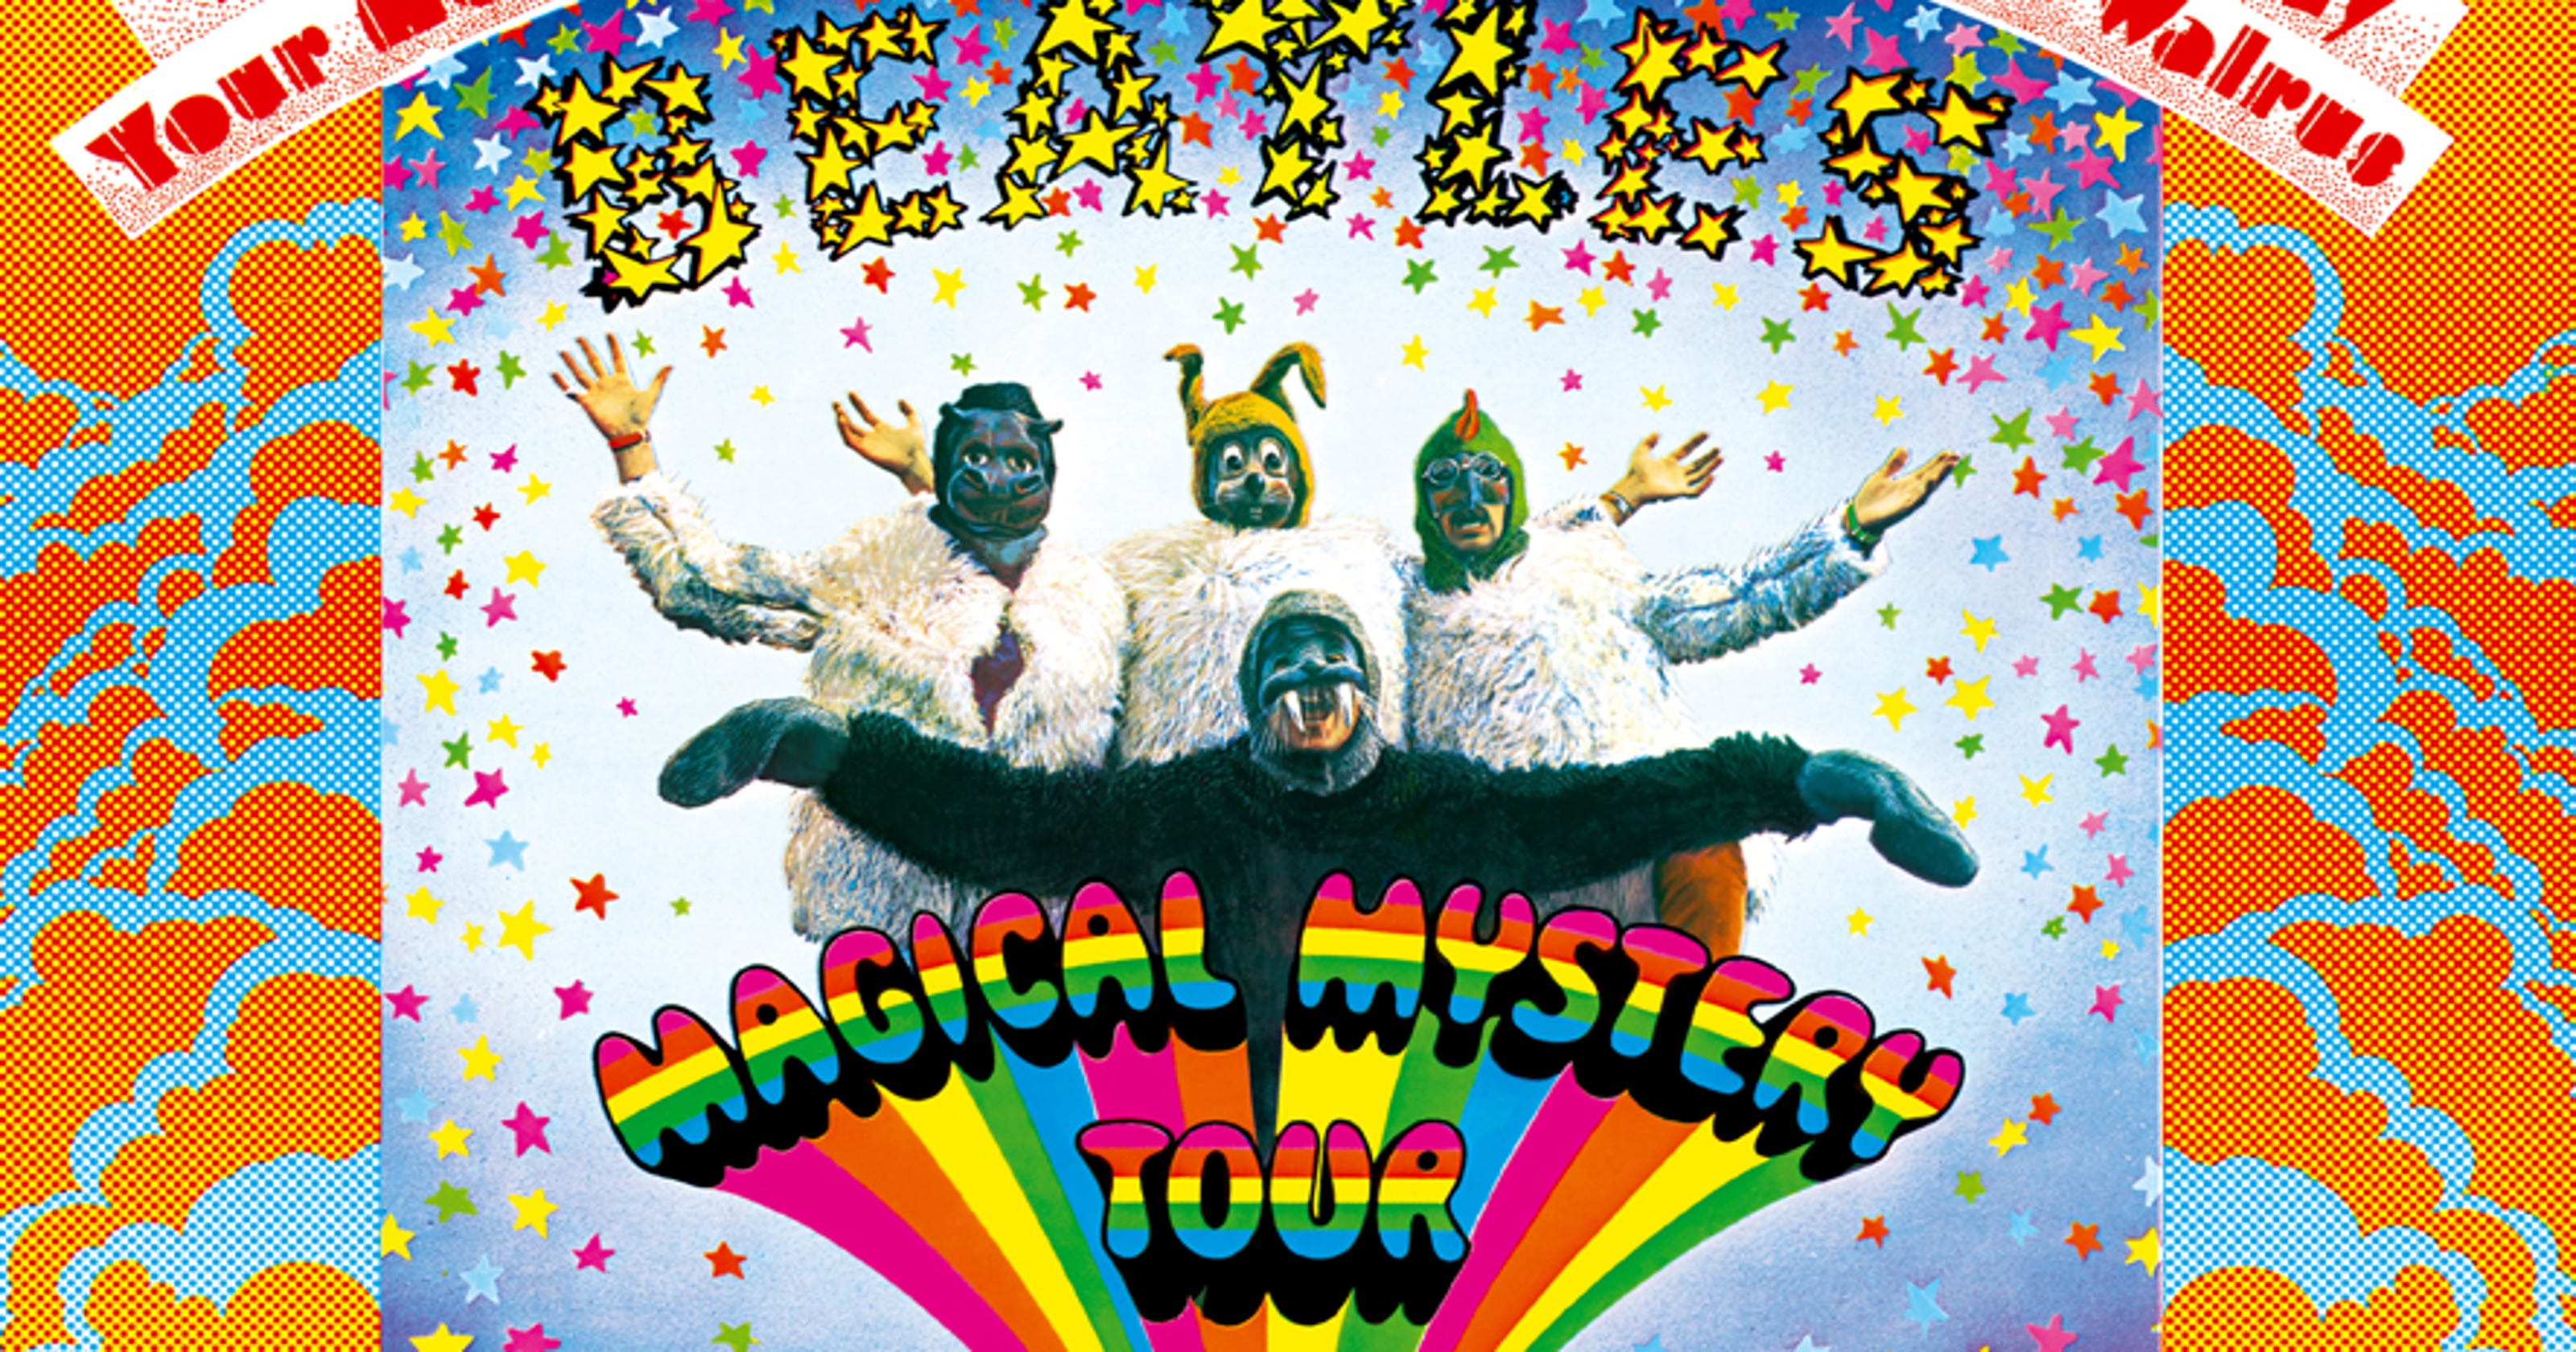 magical mystery tour vacation